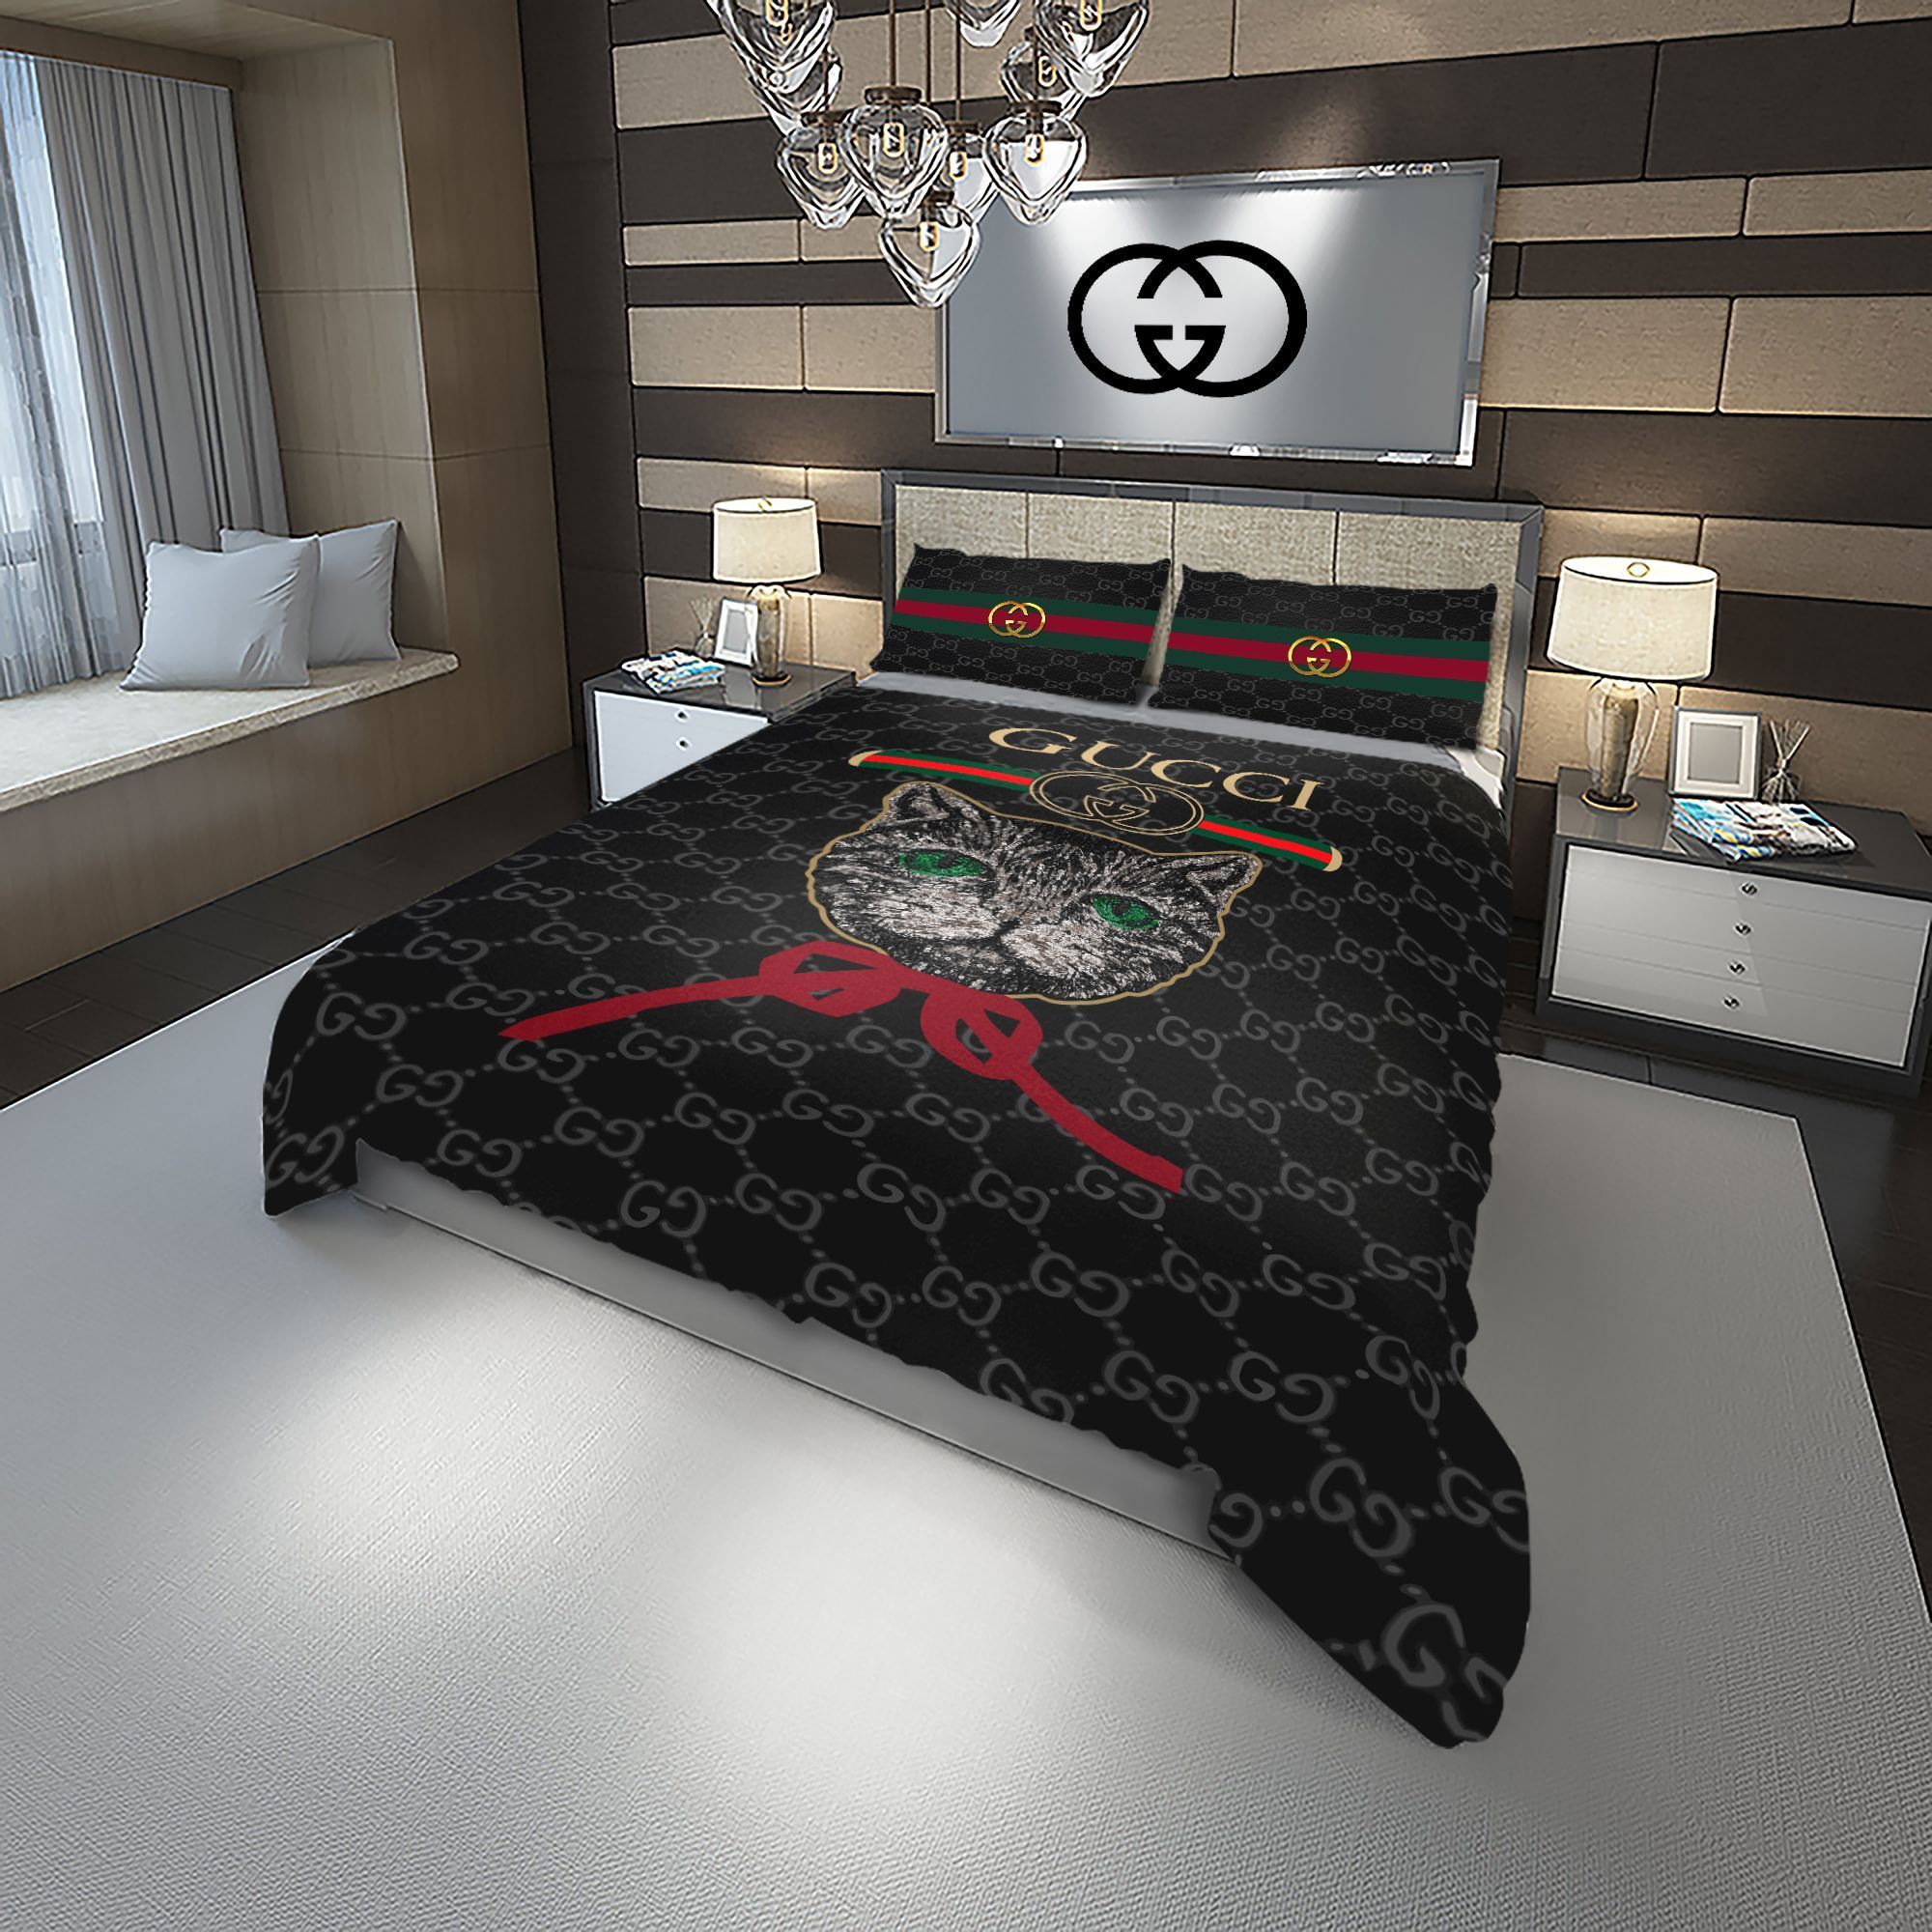 Let me show you about some luxury brand bedding set 2022 74